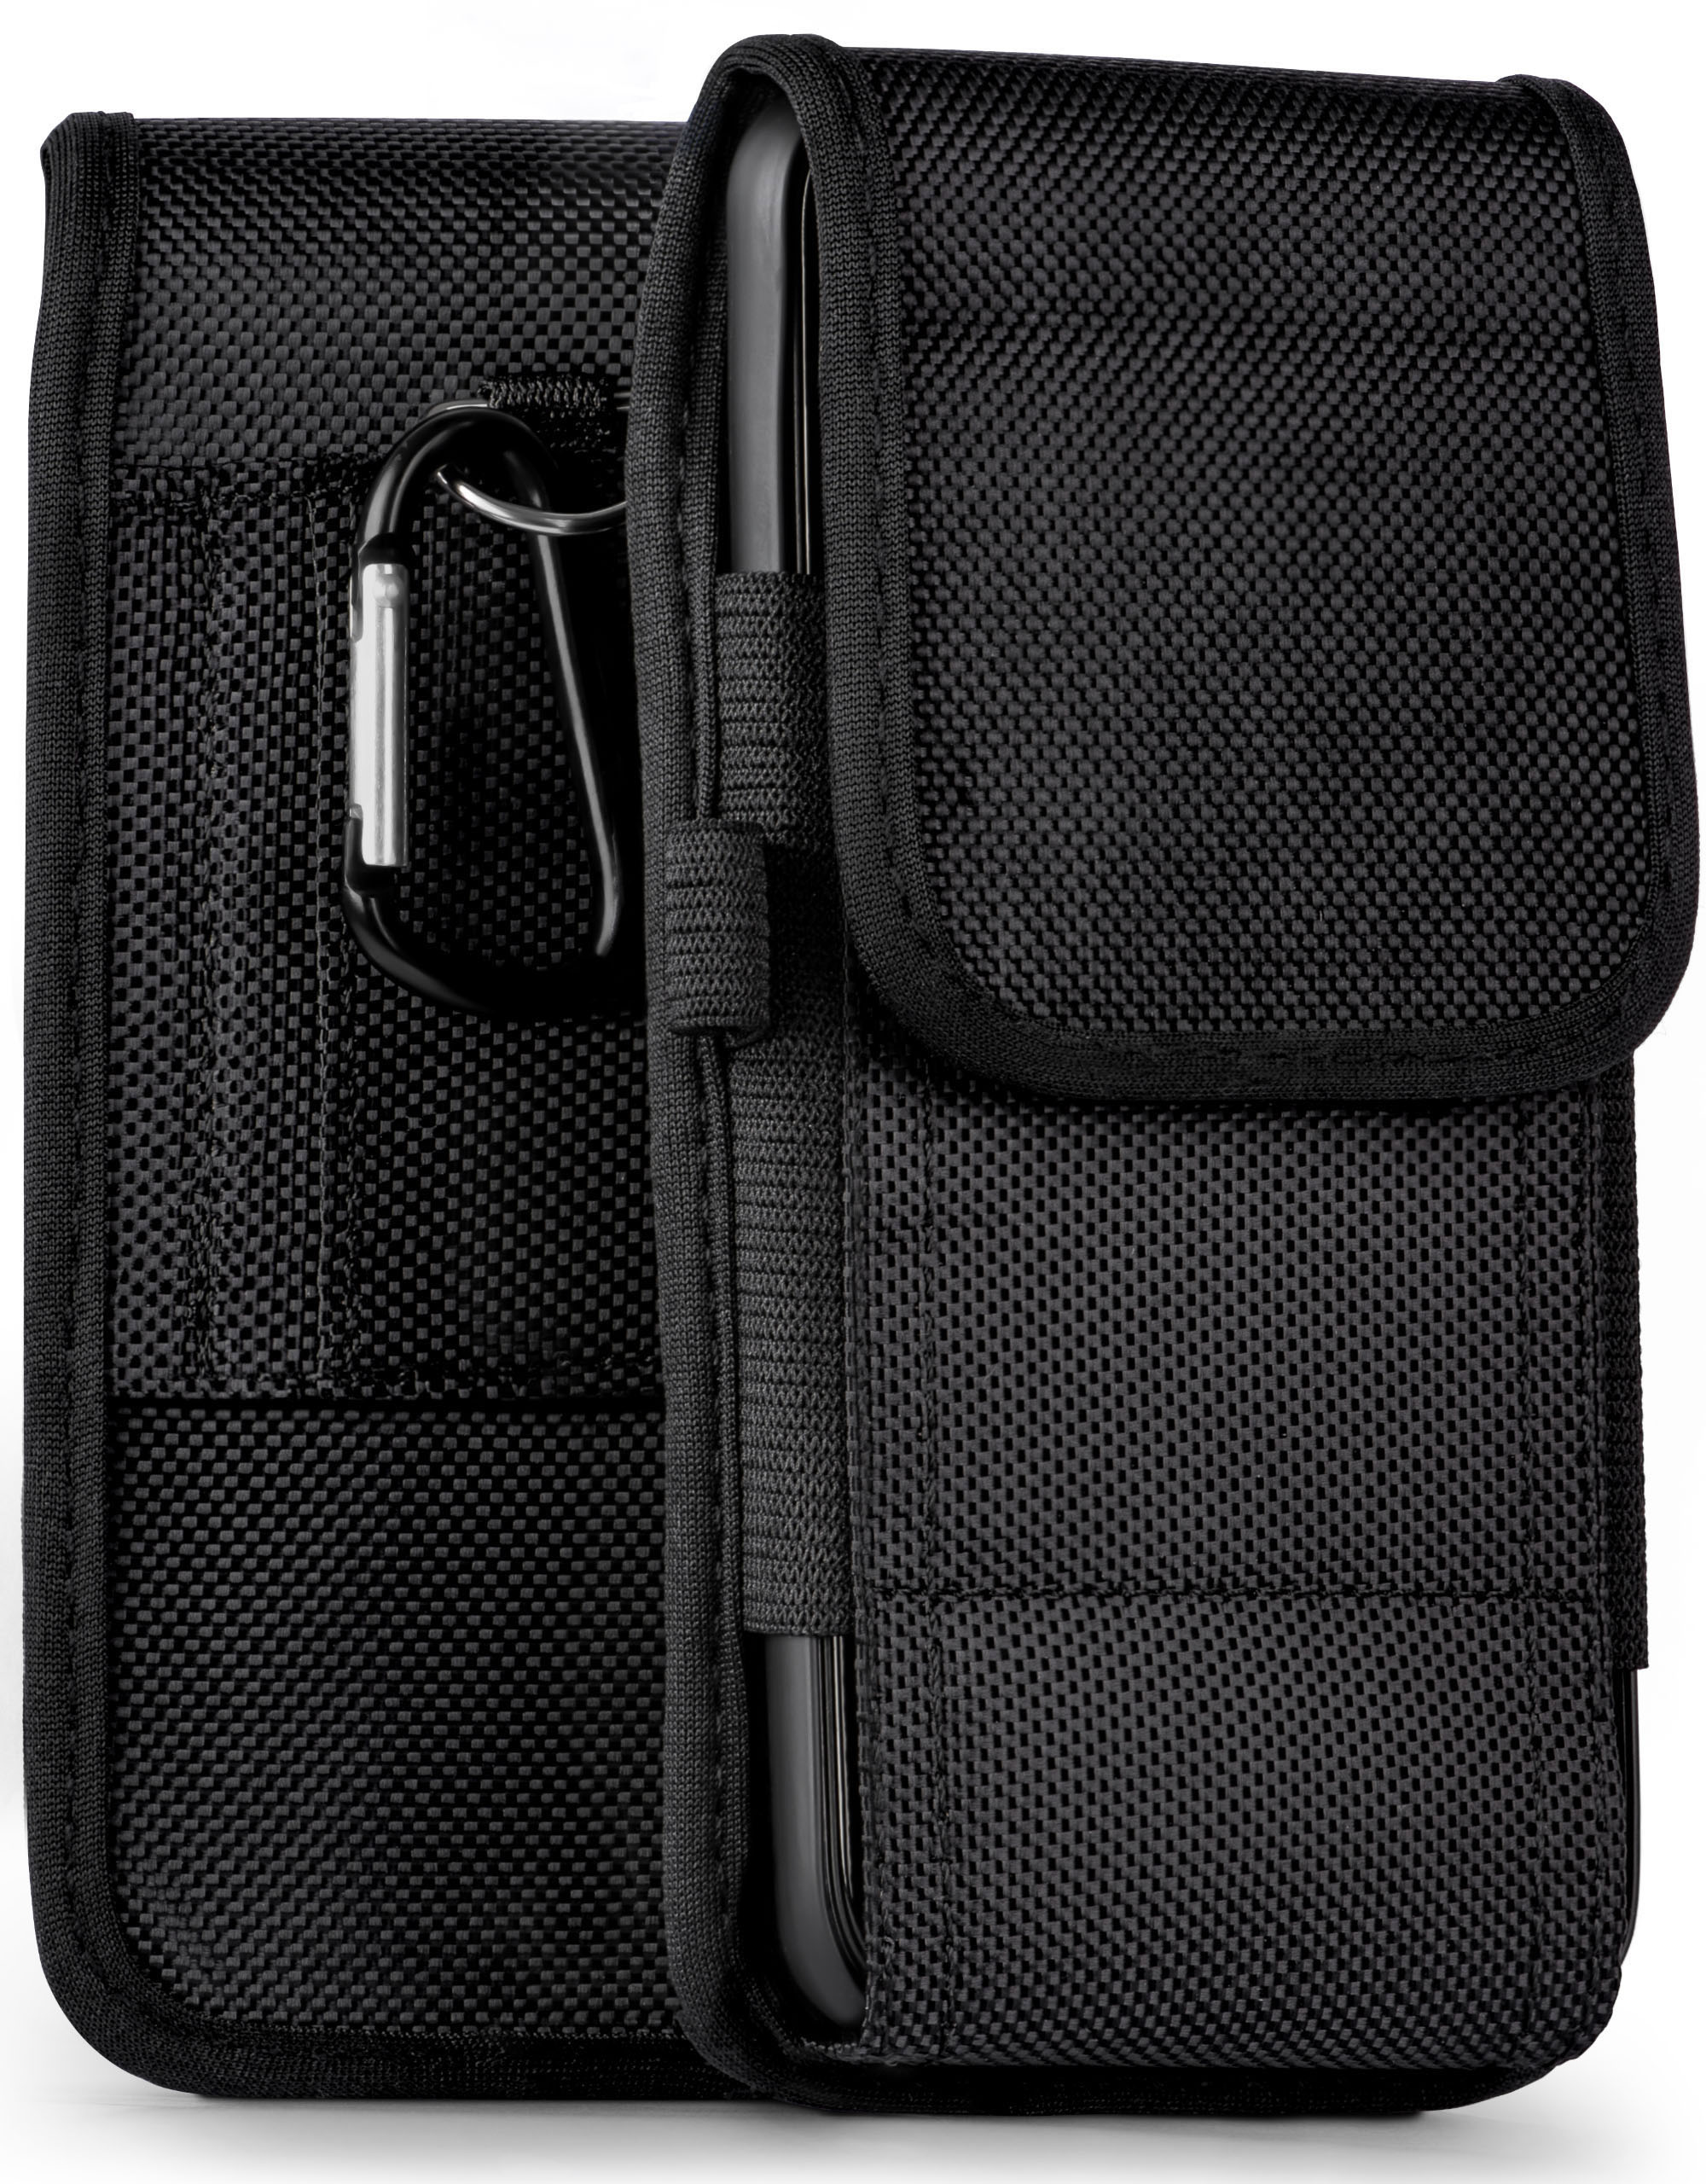 MOEX Agility Case, TP-Link, Holster, Max, Neffos Trail C9